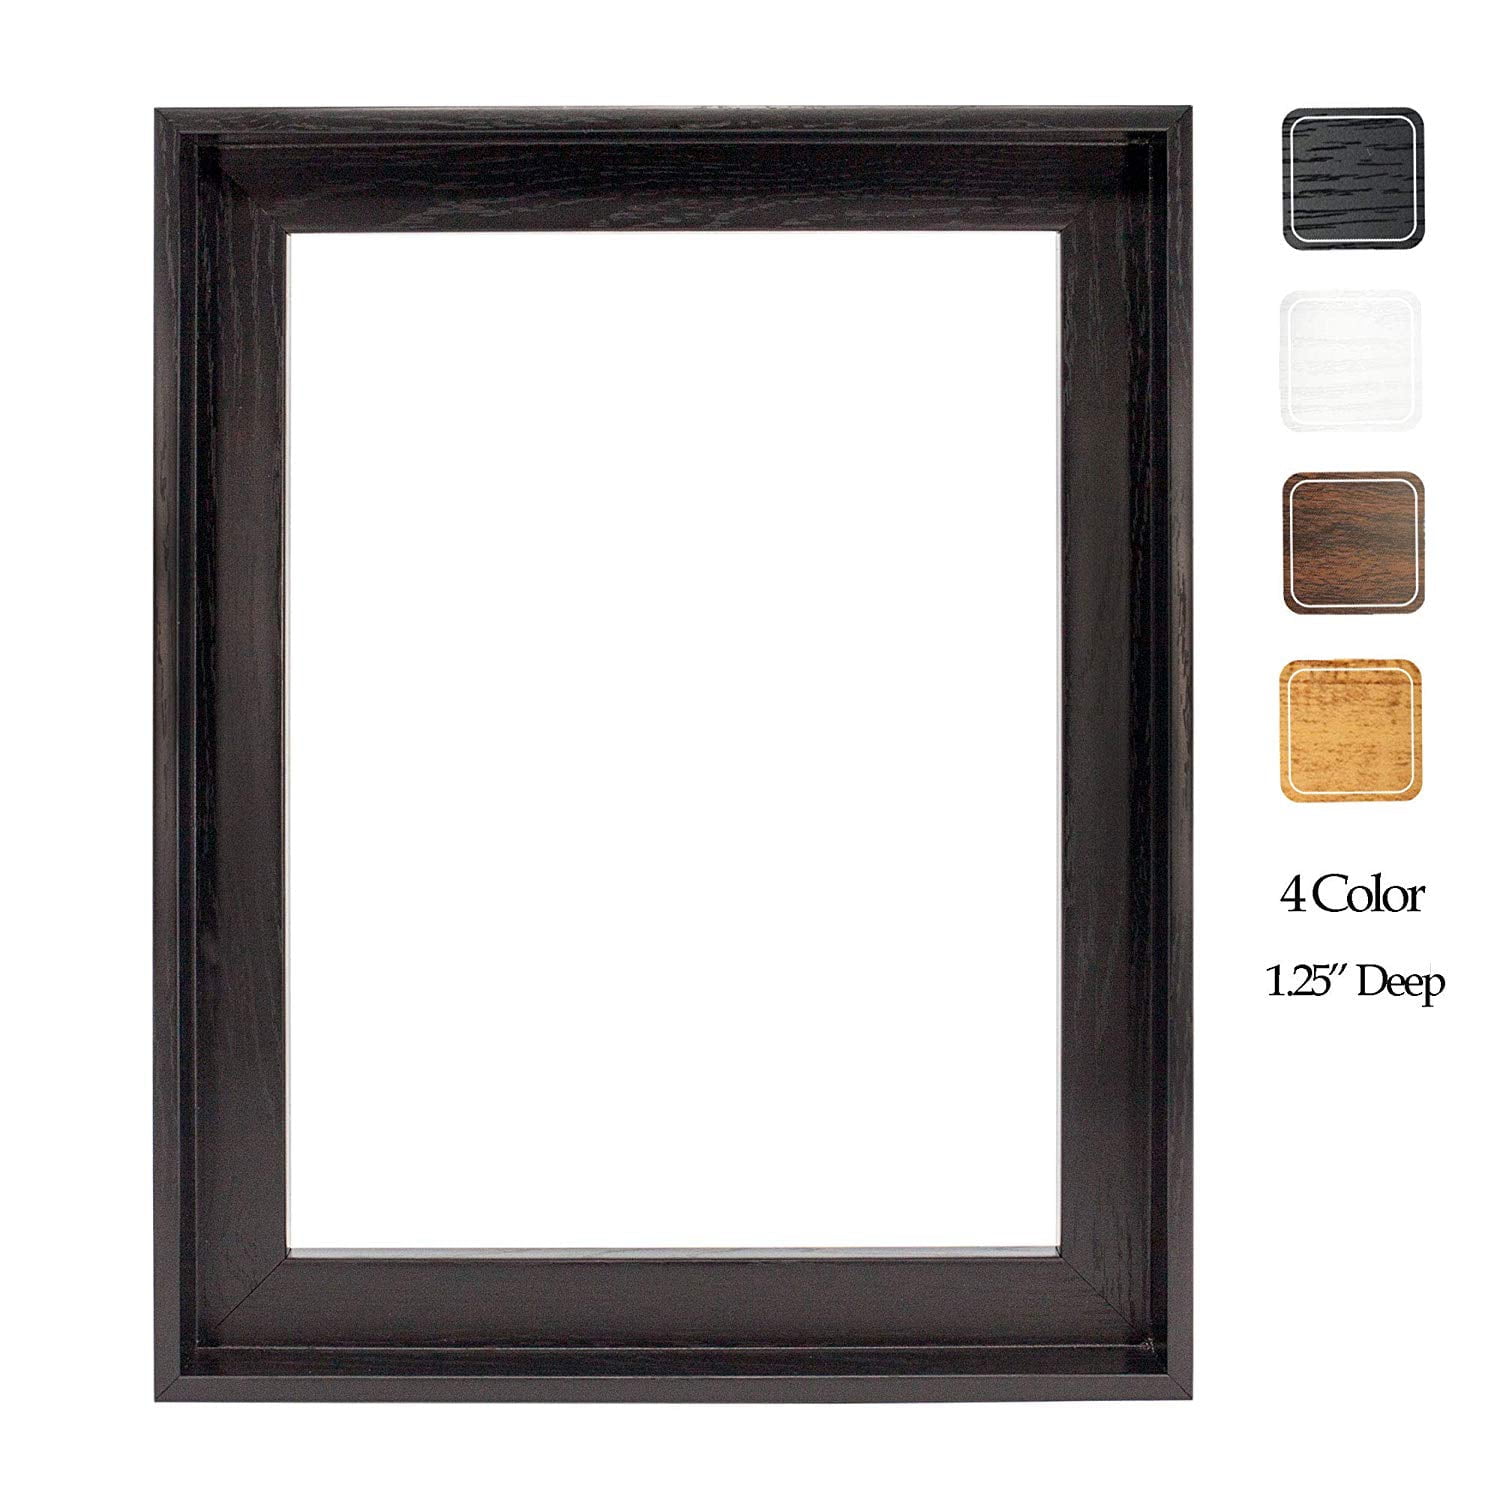 8x10 Inches Floater Frame for 1.25 Thick Canvas, Available in 25+ Size and 4 Color White/Black/Dark&Light oak. Perfect Floating Frame for Finished